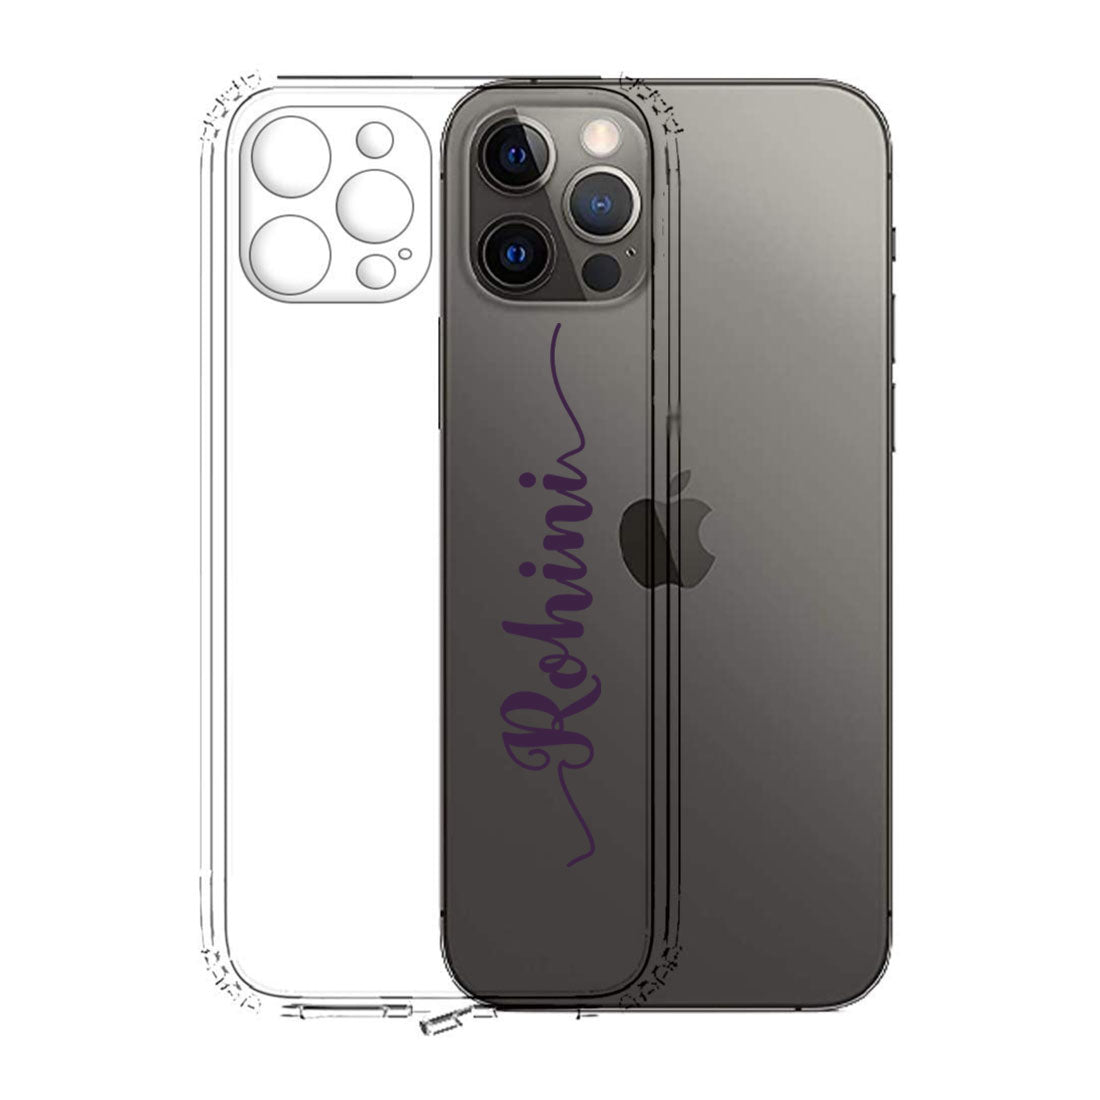 Personalized IPhone 11 Back Case with Name